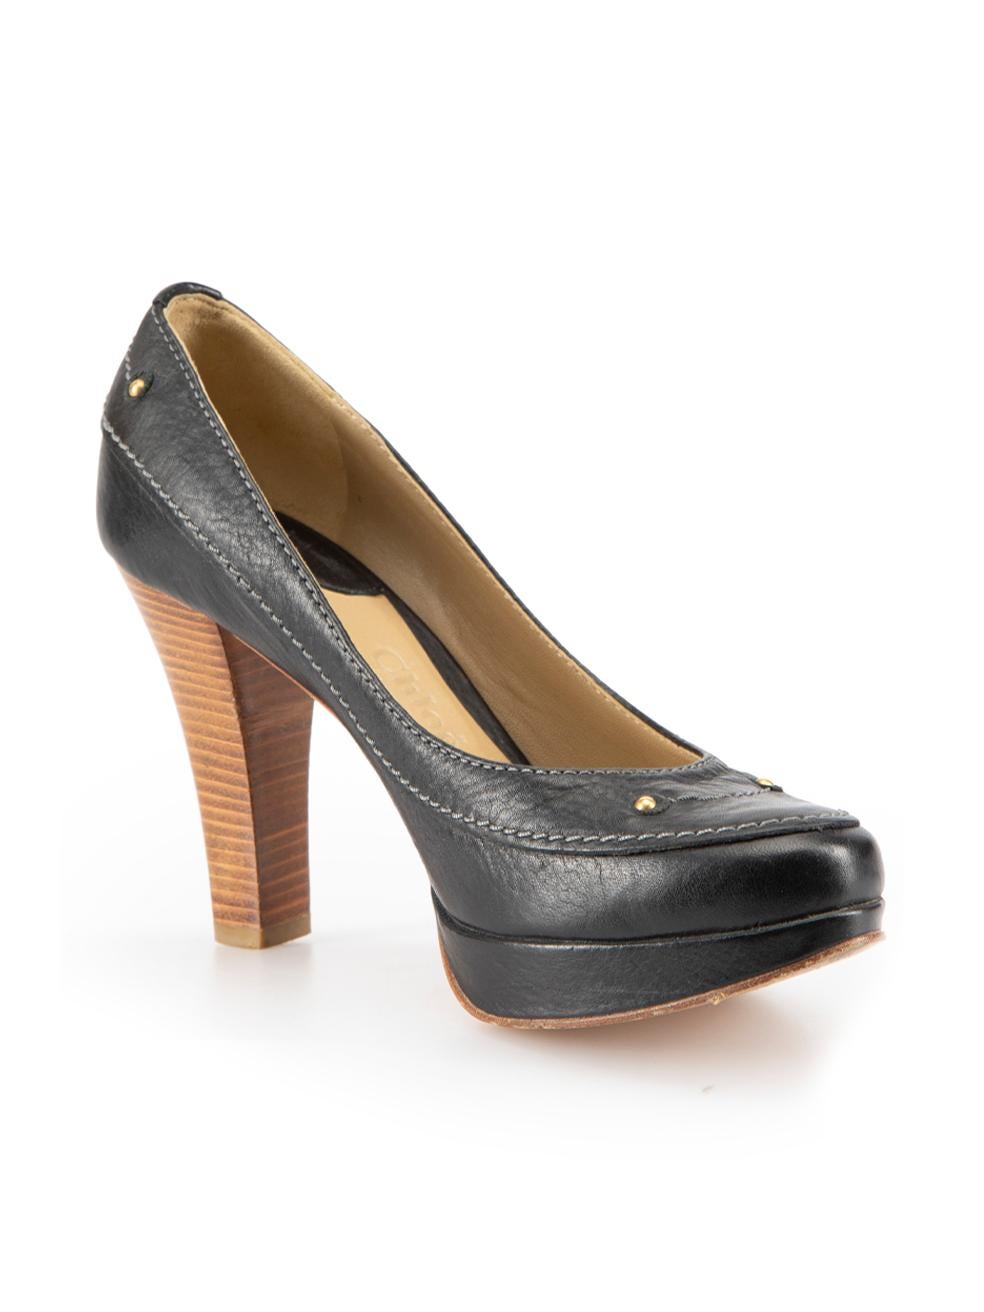 CONDITION is Very good. Minimal wear to shoes is evident. Minimal wear to the right shoe heel with light scratches and flattened wear to the heel-tip on this used Chloé designer resale item.



Details


Black

Leather

Pumps

Almond